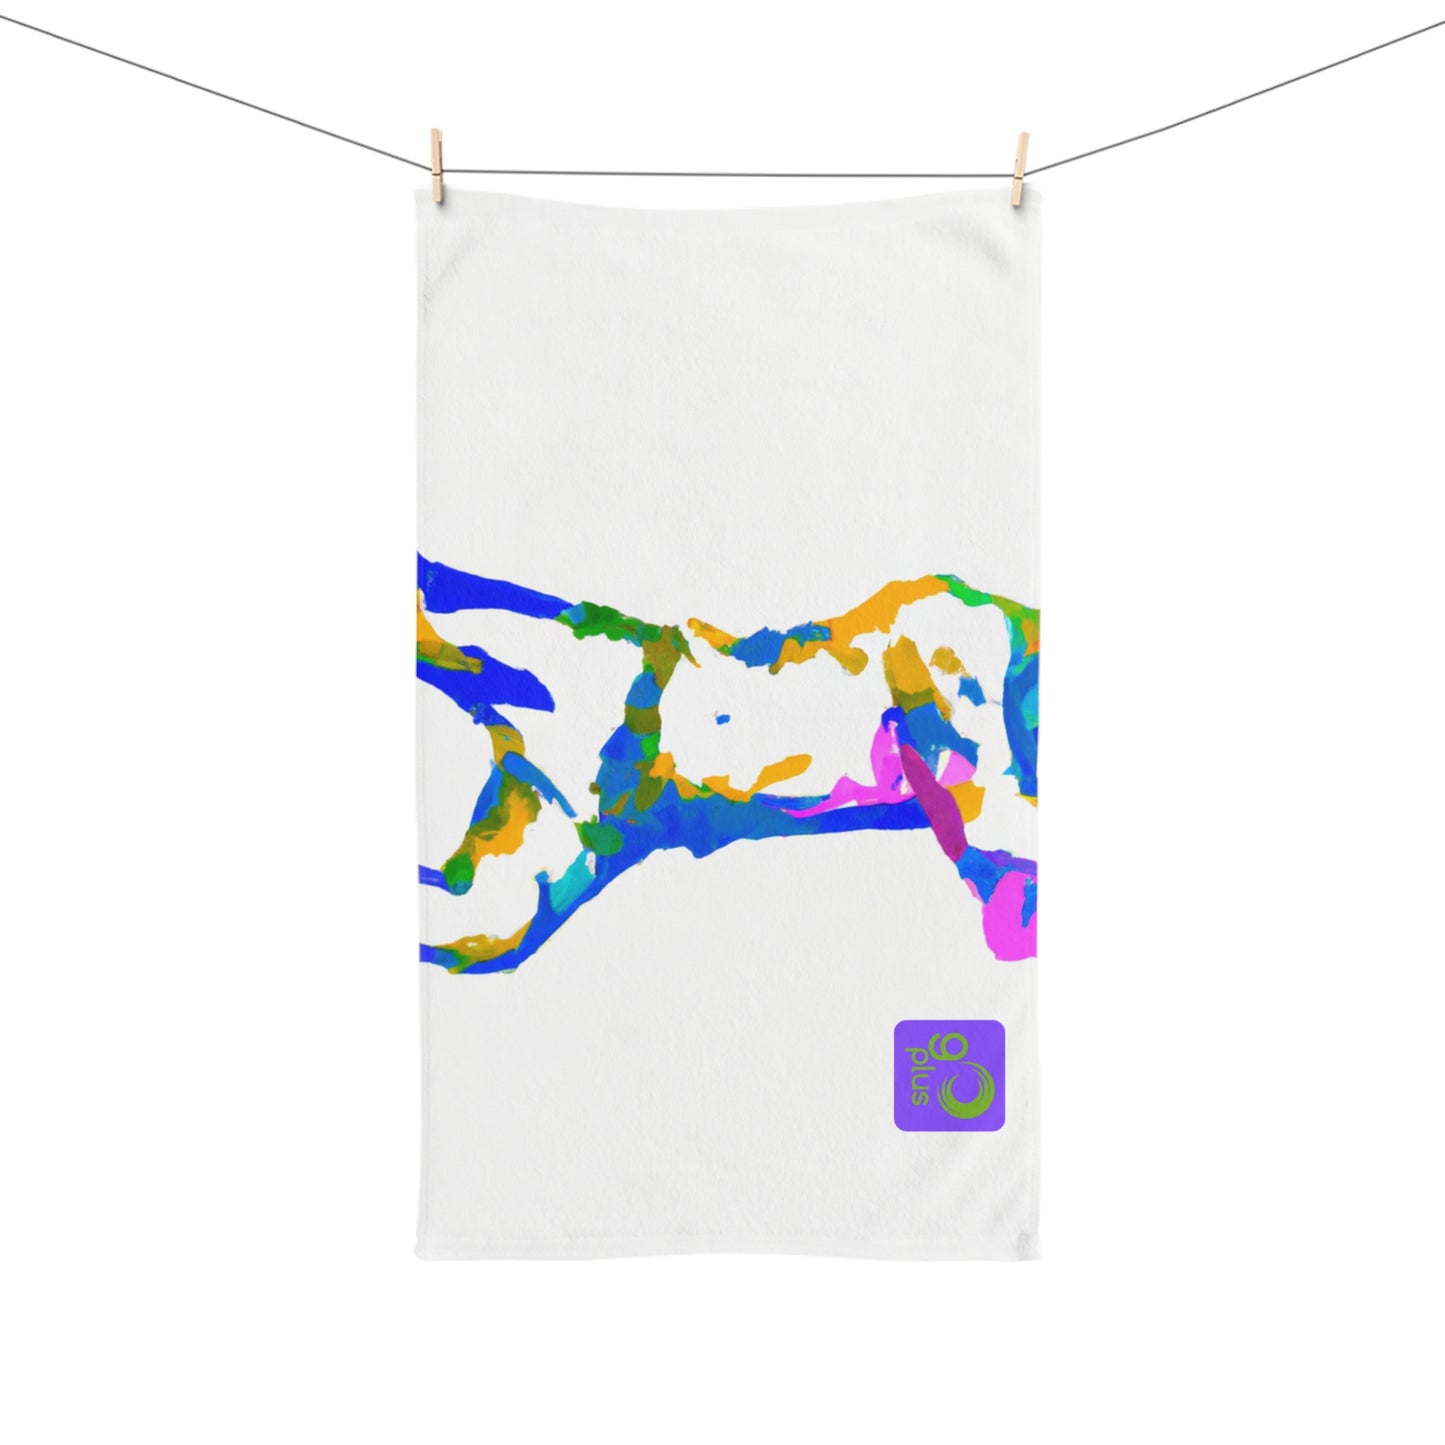 "The Grace of Motion: A Sport Inspired Exploration of Energy and Action" - Go Plus Hand towel